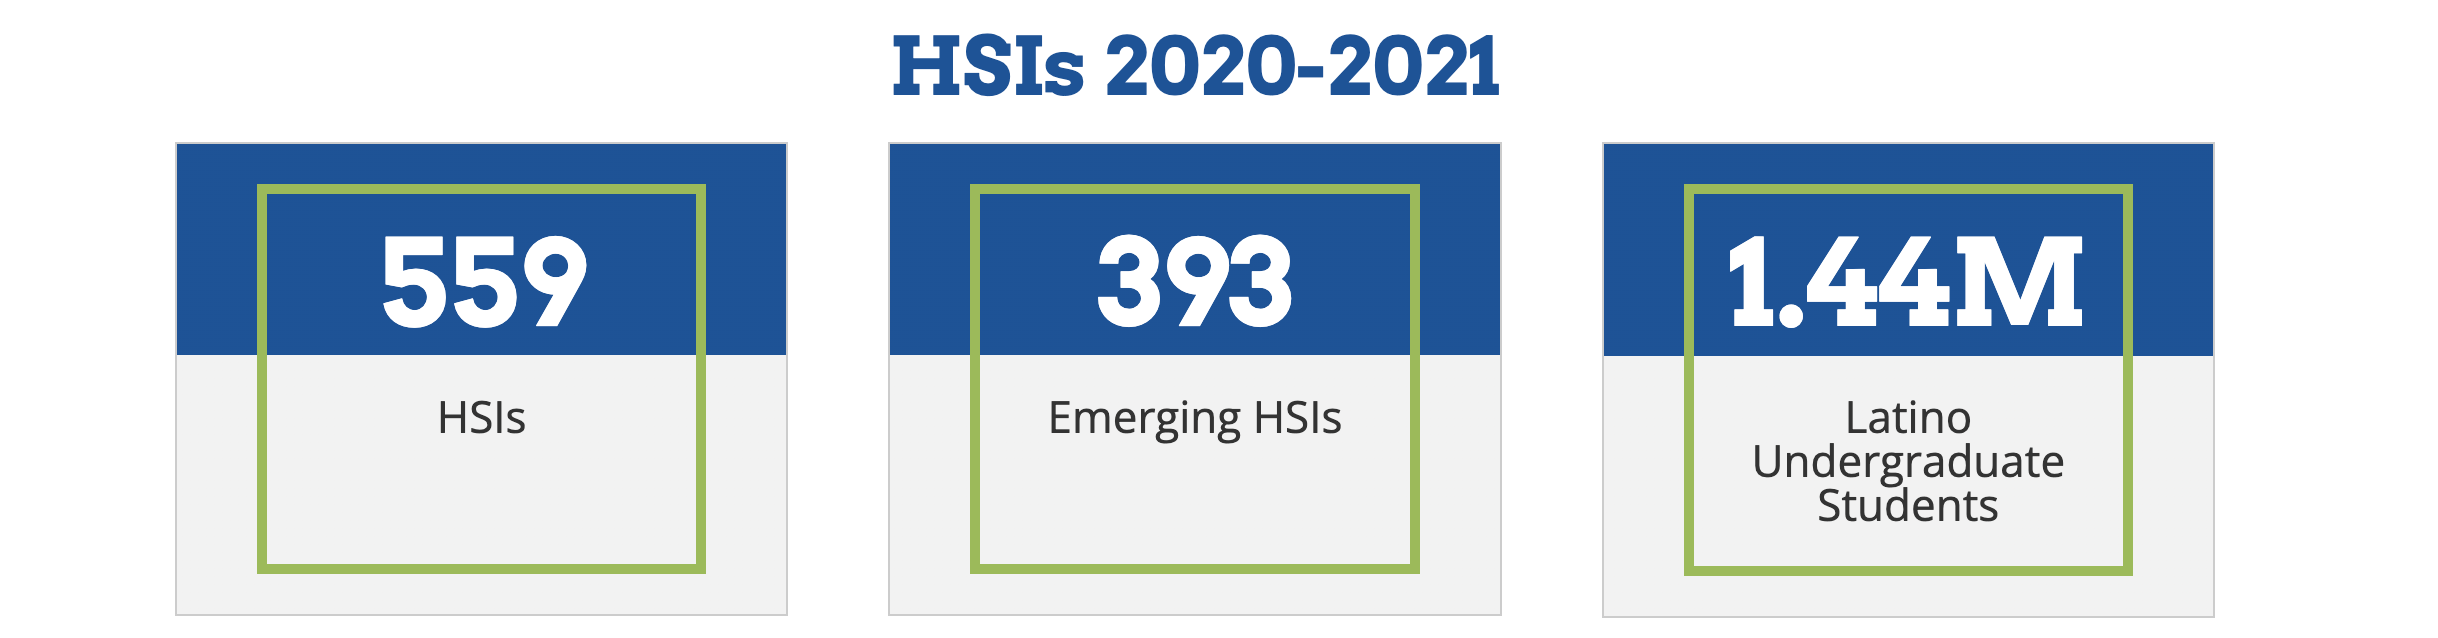 Graphic-HSIs-2020-21